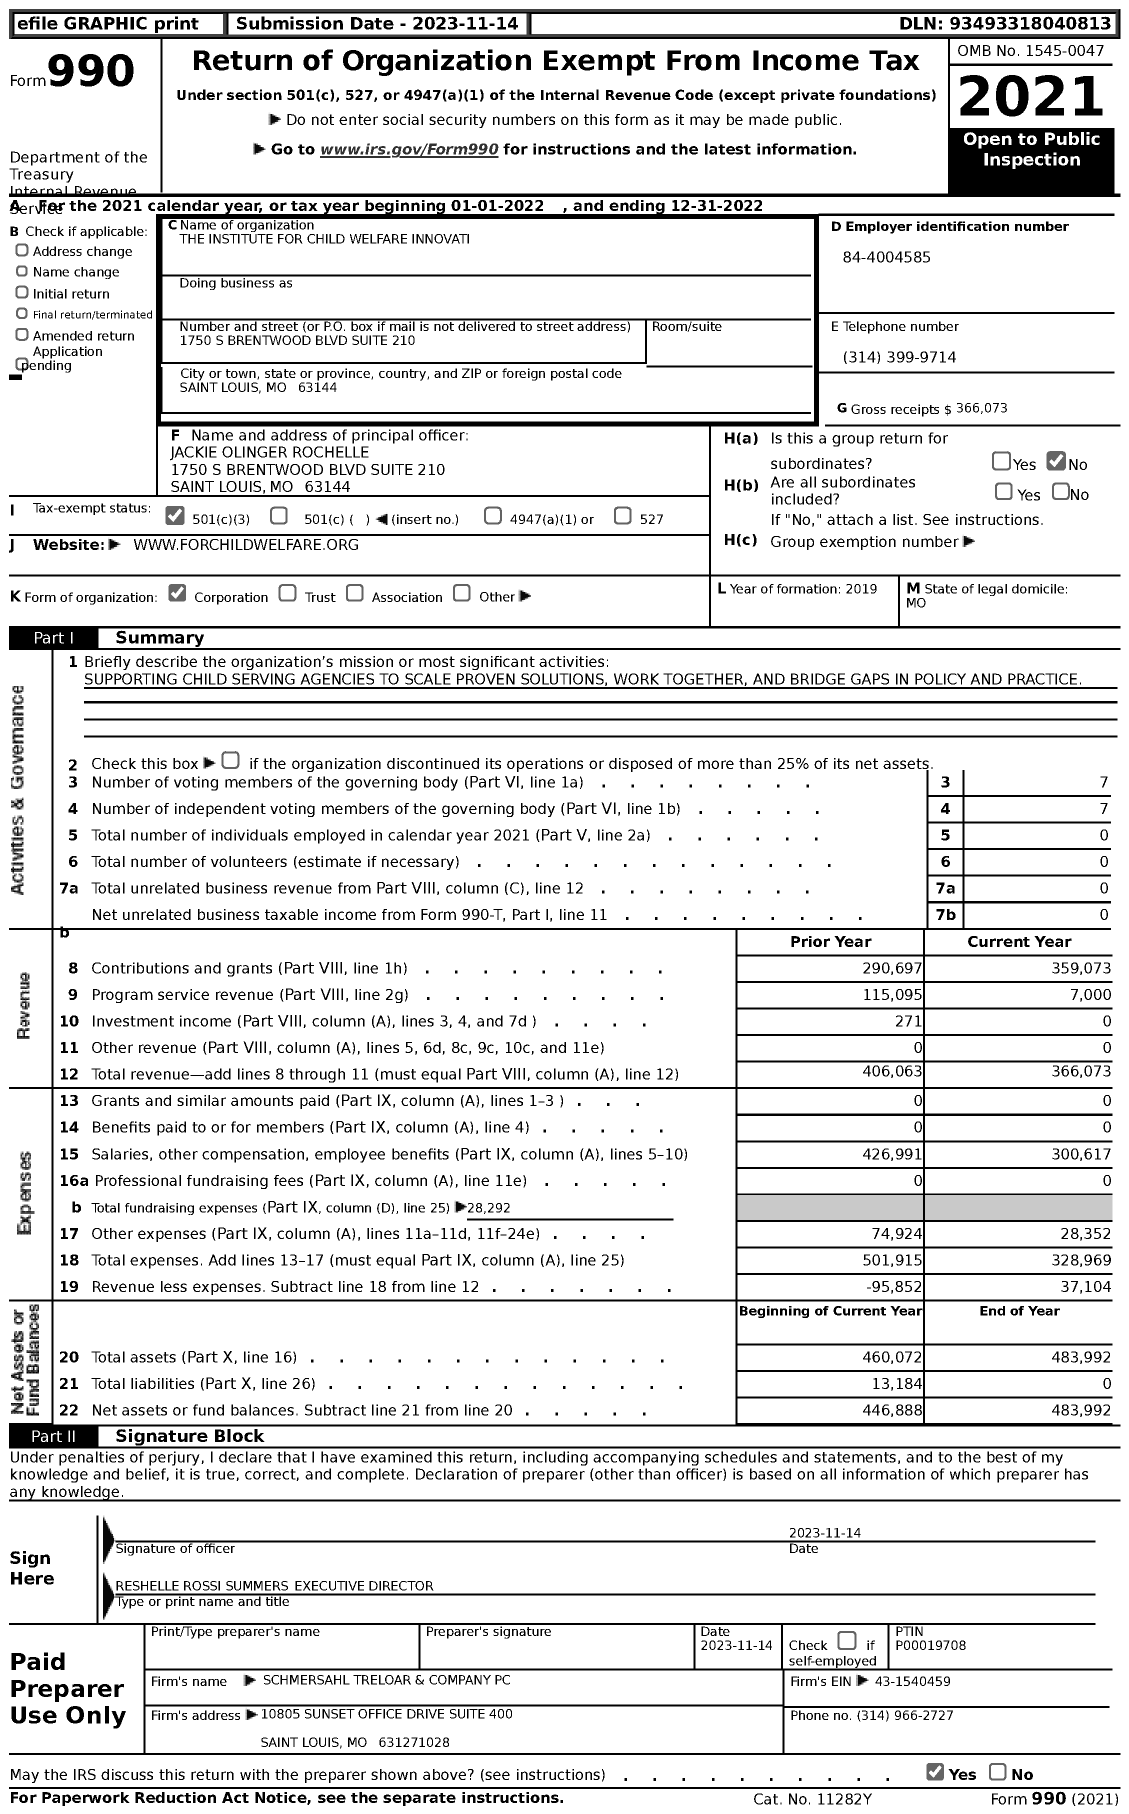 Image of first page of 2022 Form 990 for The Institute for Child Welfare Innovation